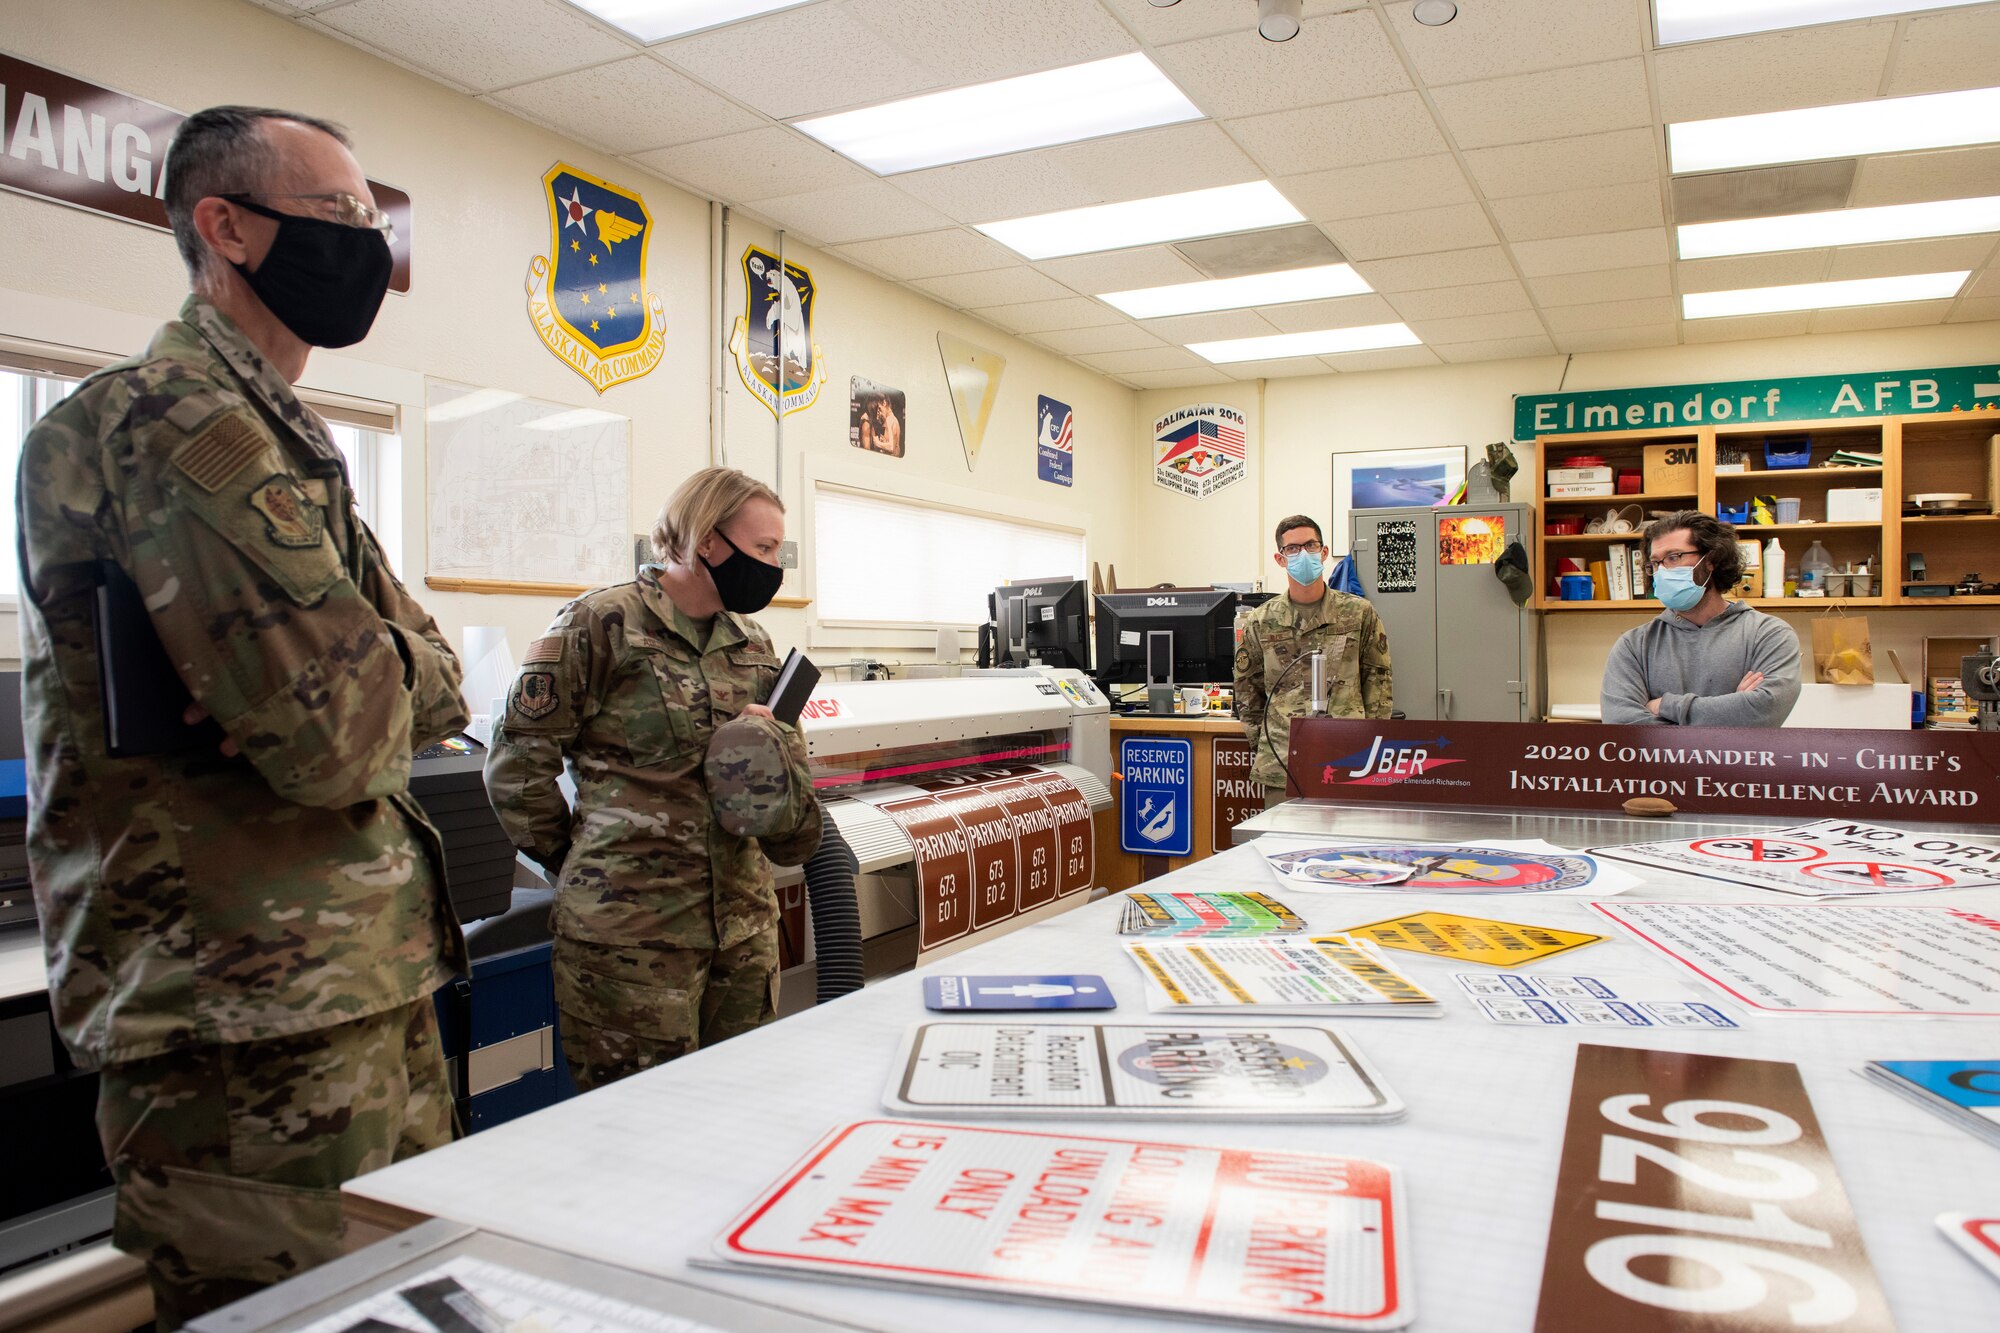 U.S. Air Force Chief Master Sgt. Lee Mills, left, Joint Base Elmendorf-Richardson and 673d Air Base Wing command chief, and U.S. Air Force Col. Kirsten Aguilar, JBER and 673d ABW commander, look at signs during a 773d Civil Engineer Squadron immersion tour at JBER, Alaska, Sept. 1, 2020. Aguilar familiarized herself with the 773d CES and its role in supporting installation readiness after taking command of the installation on July 14, 2020. The 773d CES maintains structures throughout the base as well as runs the installation’s emergency management program.